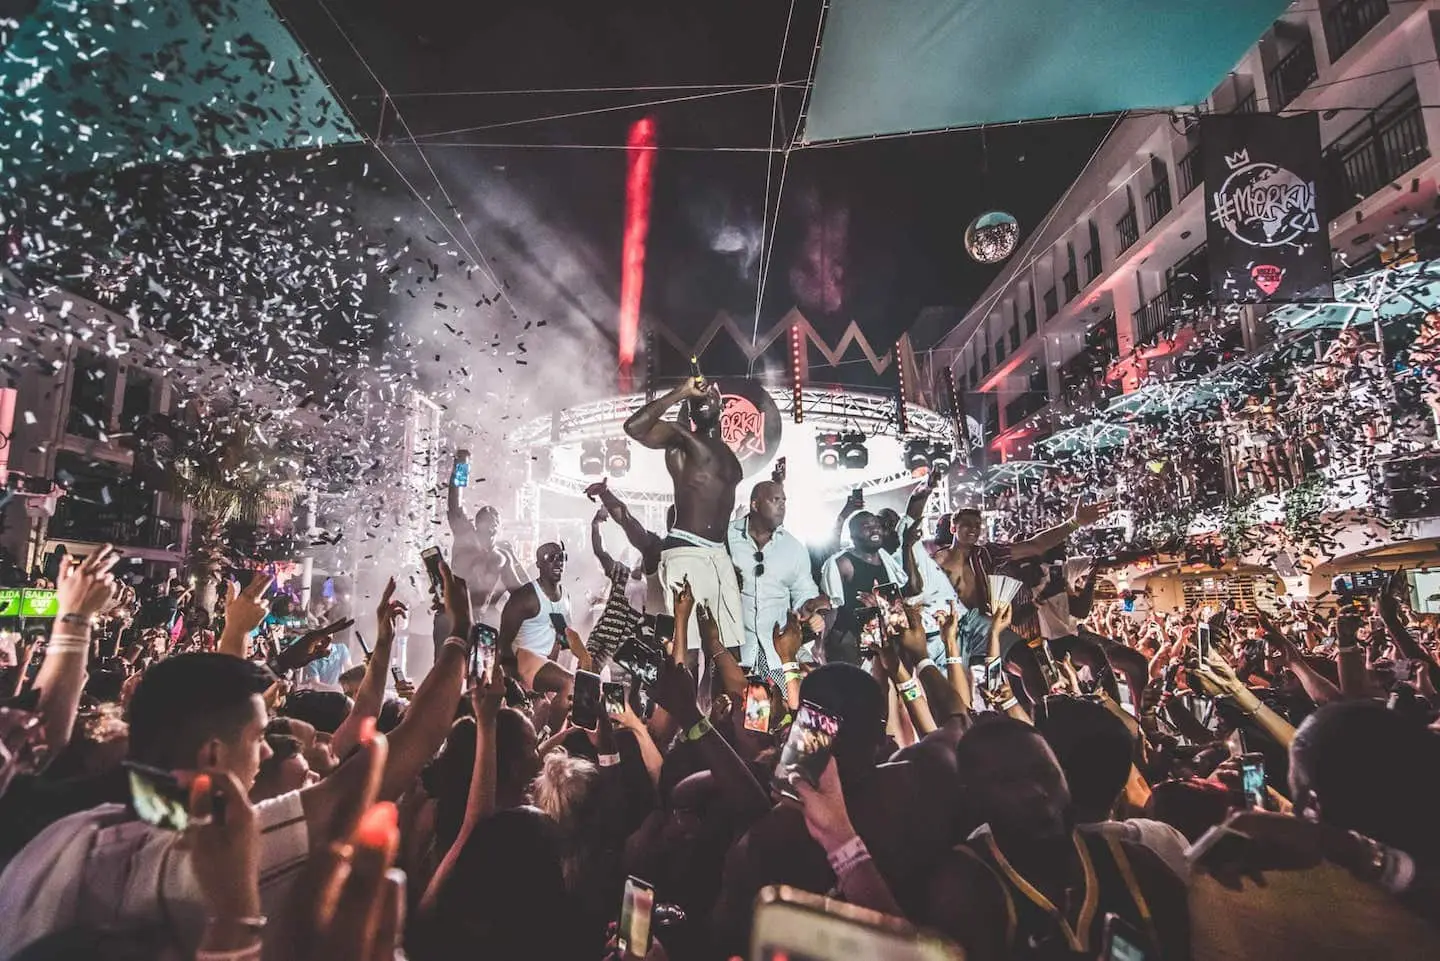 stormzy on stage at merky festival in ibiza